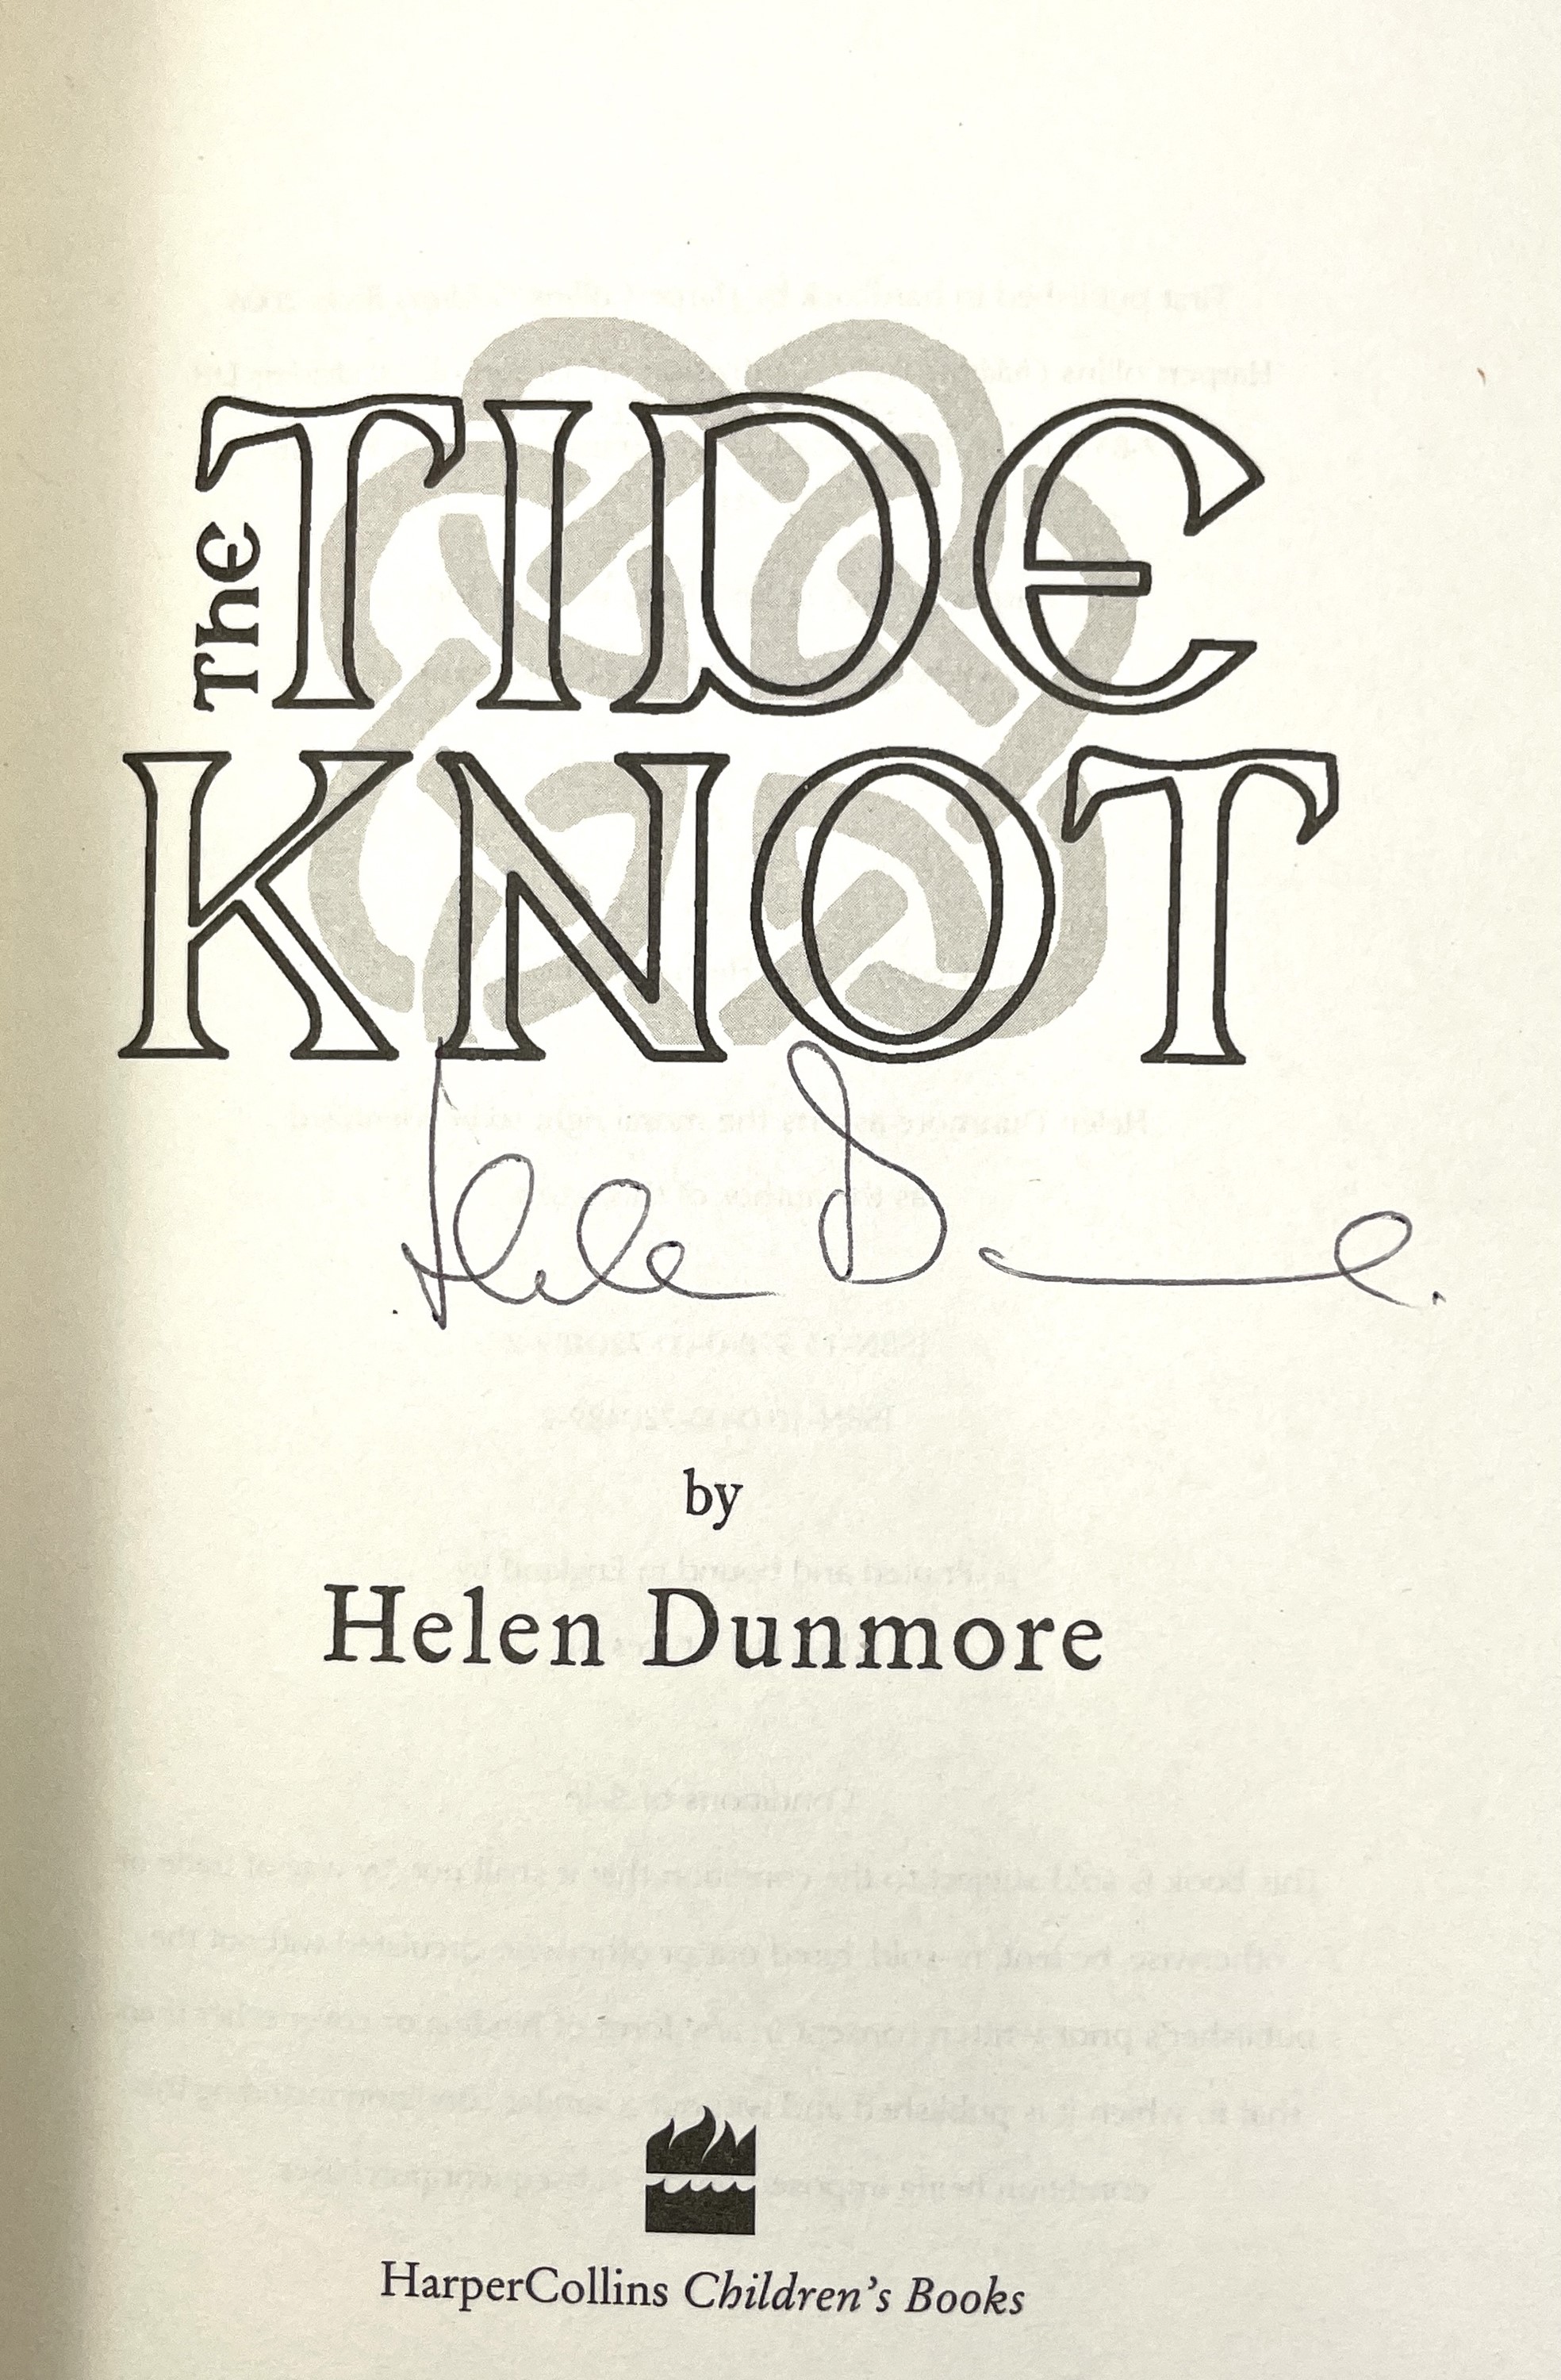 The Tide Knot by Helen Dunmore